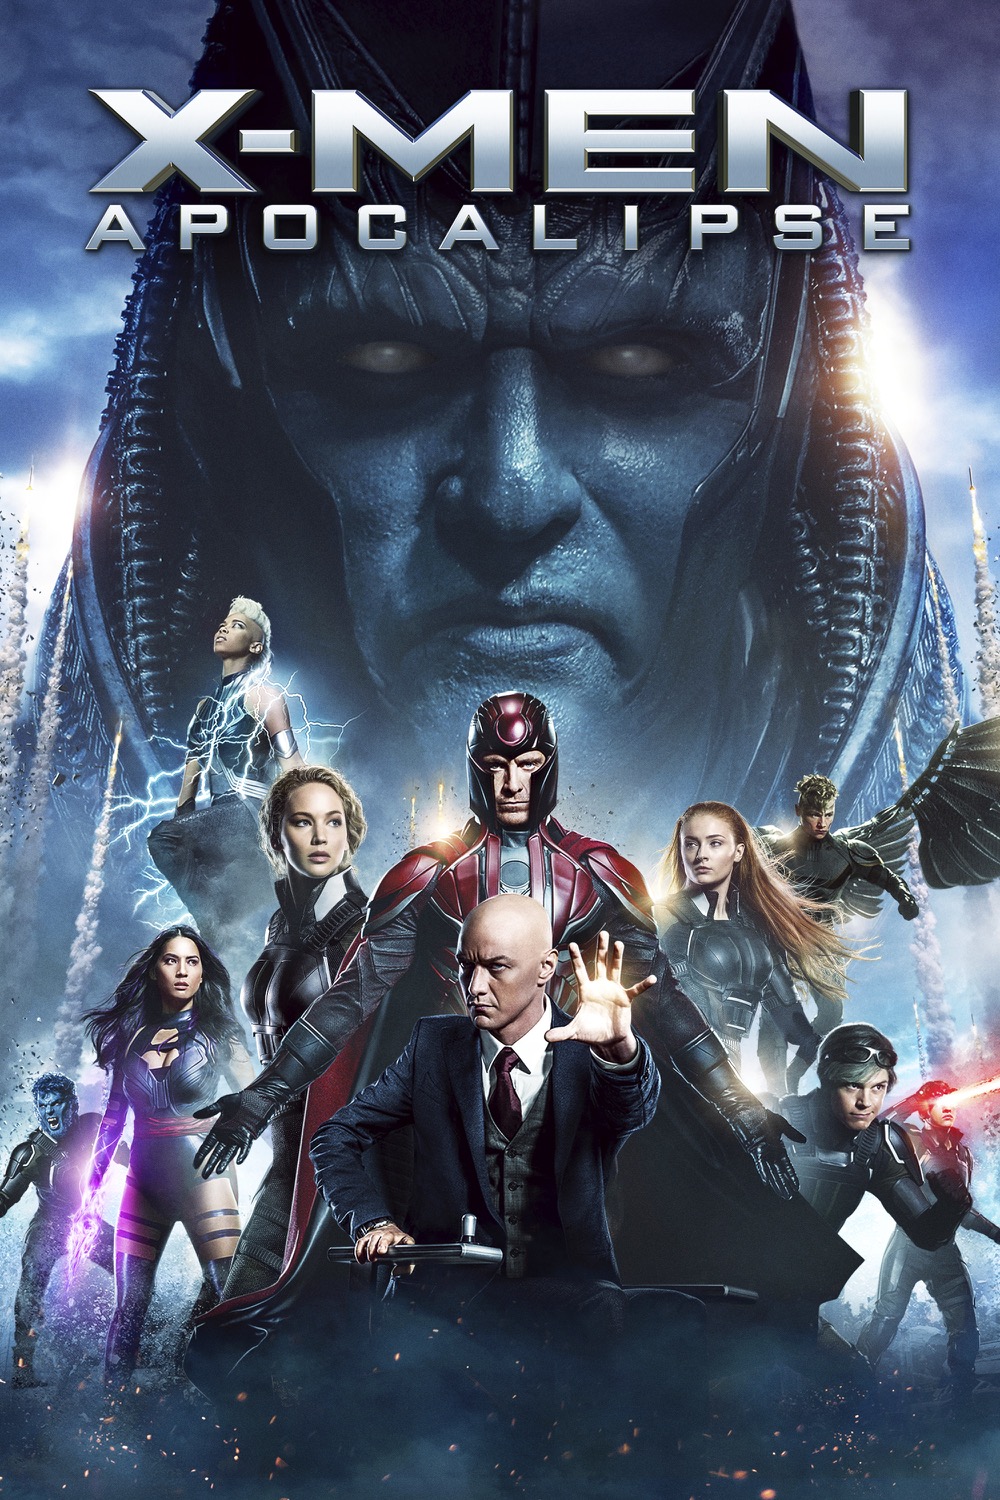 Movie of the week: buy “X-Men: Apocalypse”, by director Bryan Singer, for just $ 3!